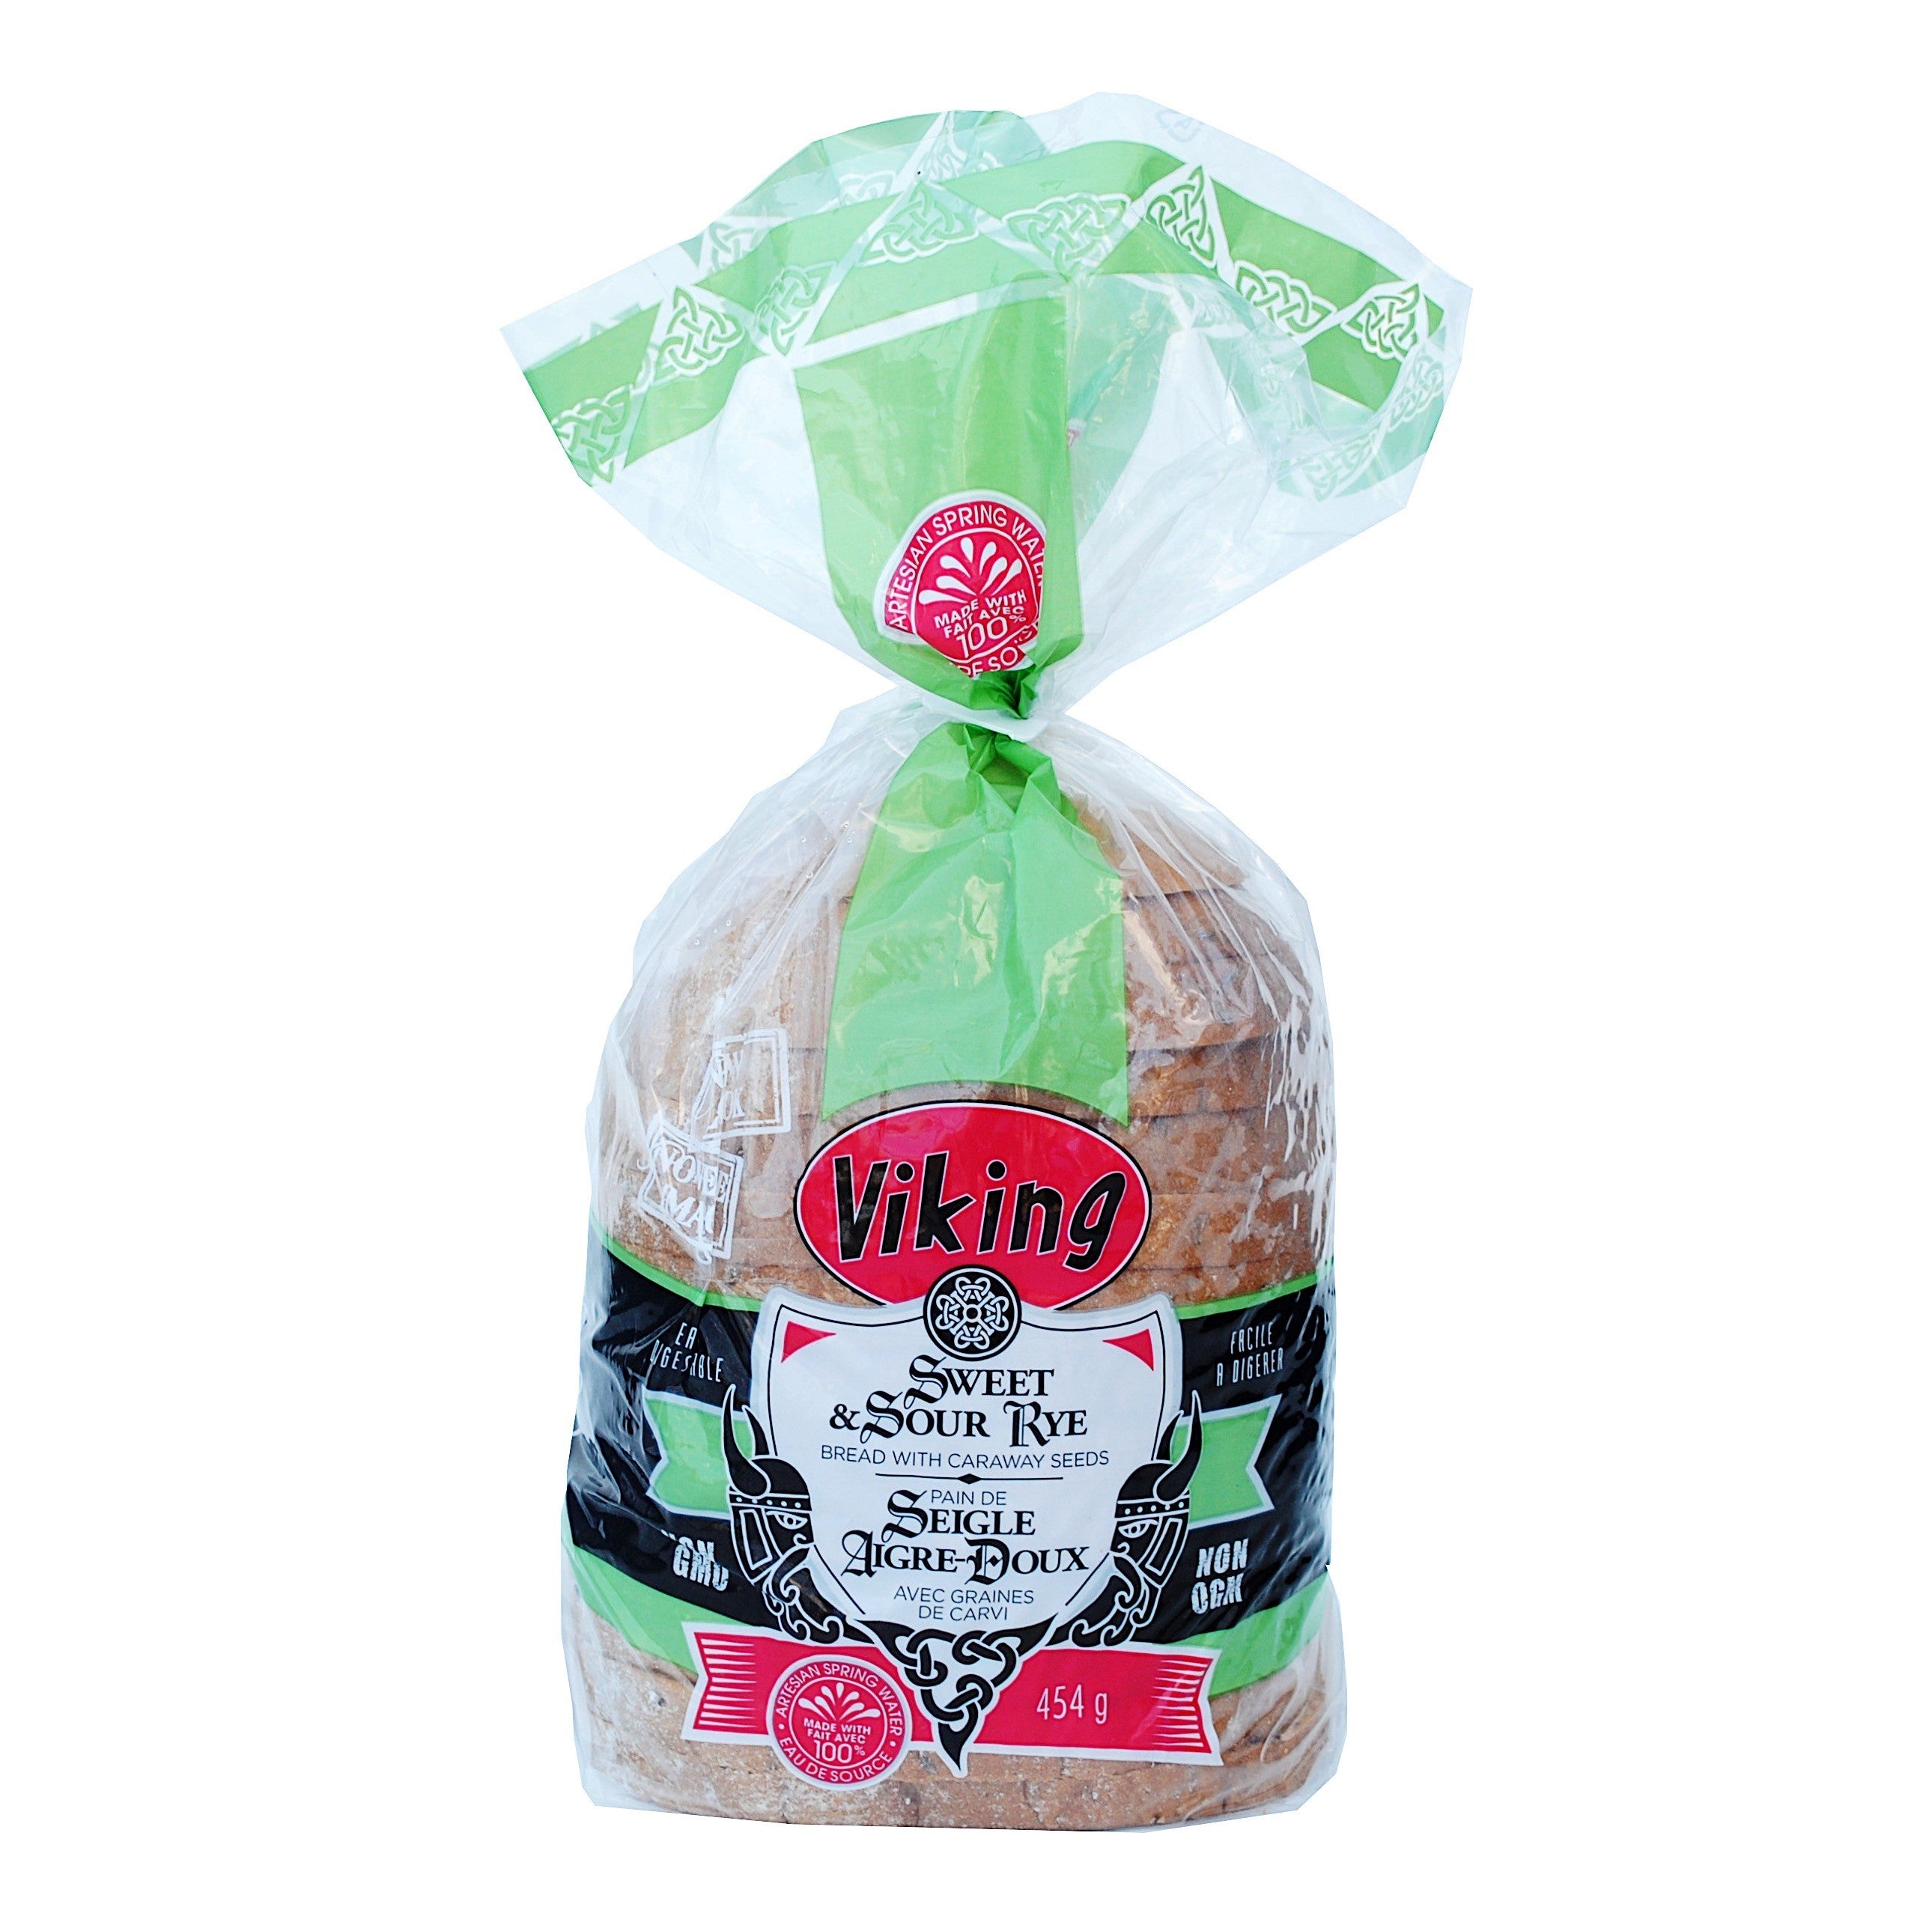 Viking Sweet &amp; Sour Rye Bread with Caraway Seeds